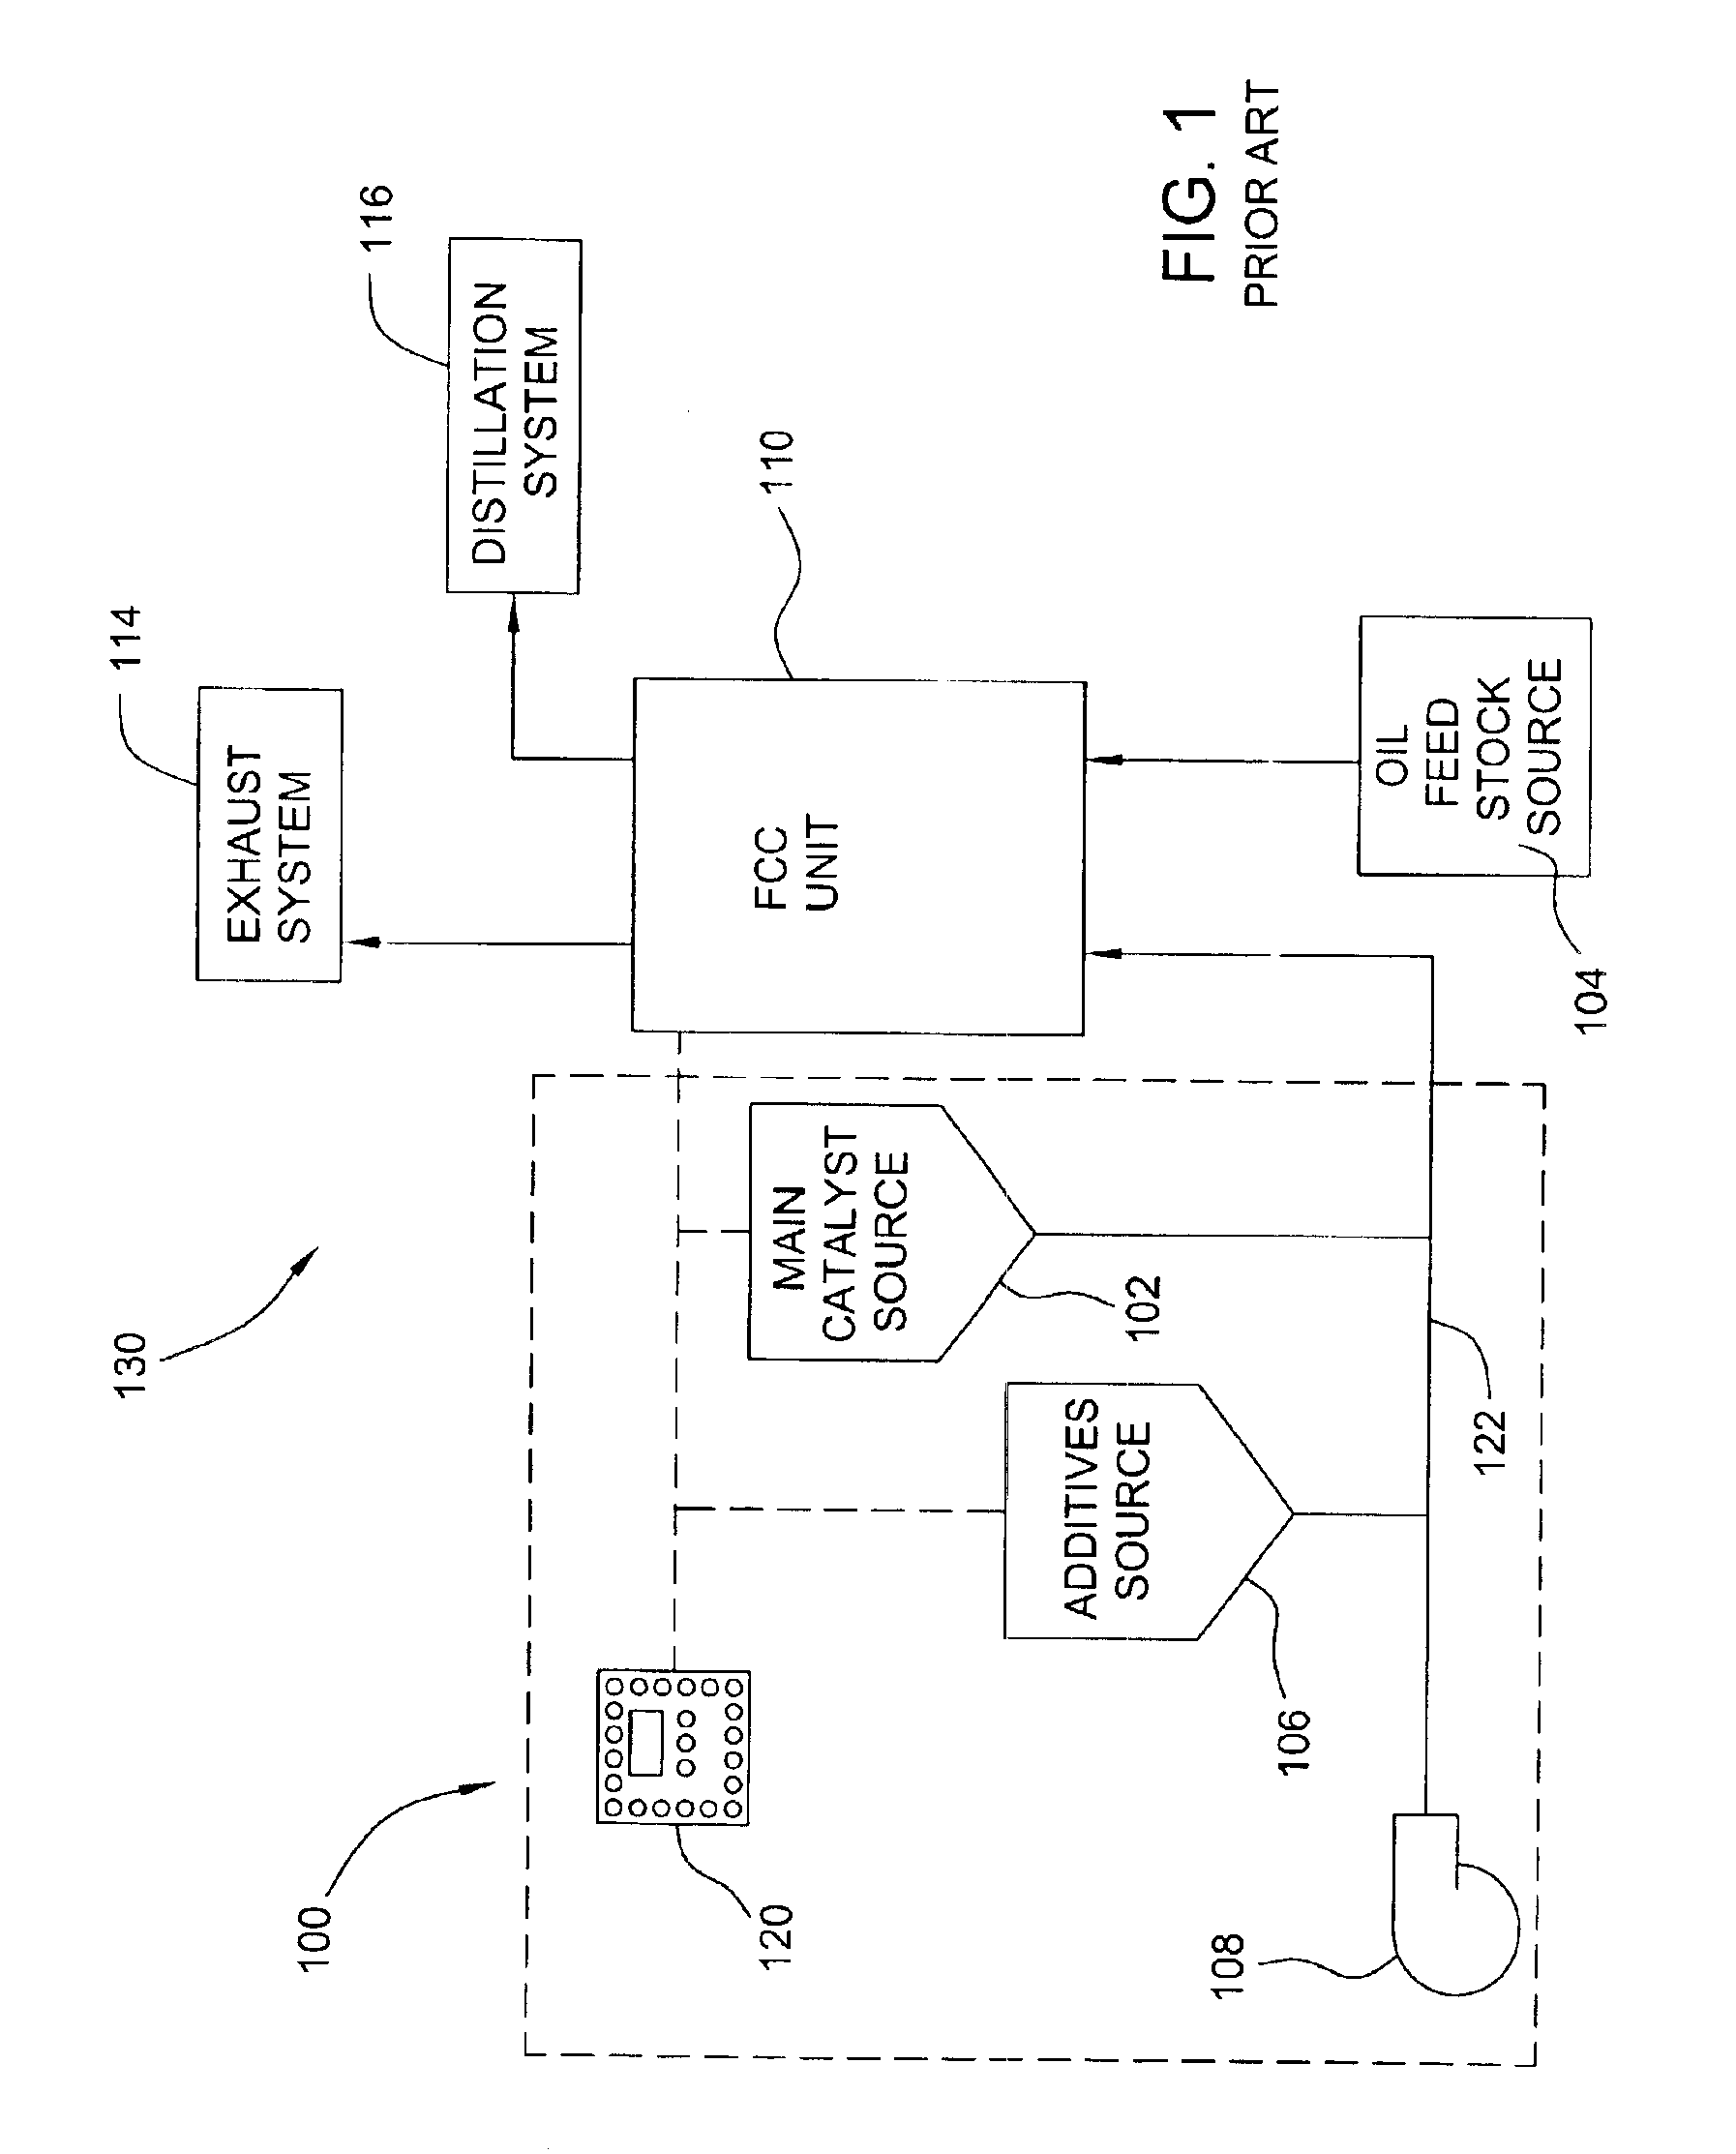 Method and apparatus for monitoring catalyst requirements of a fluid catalytic cracking catalyst injection system